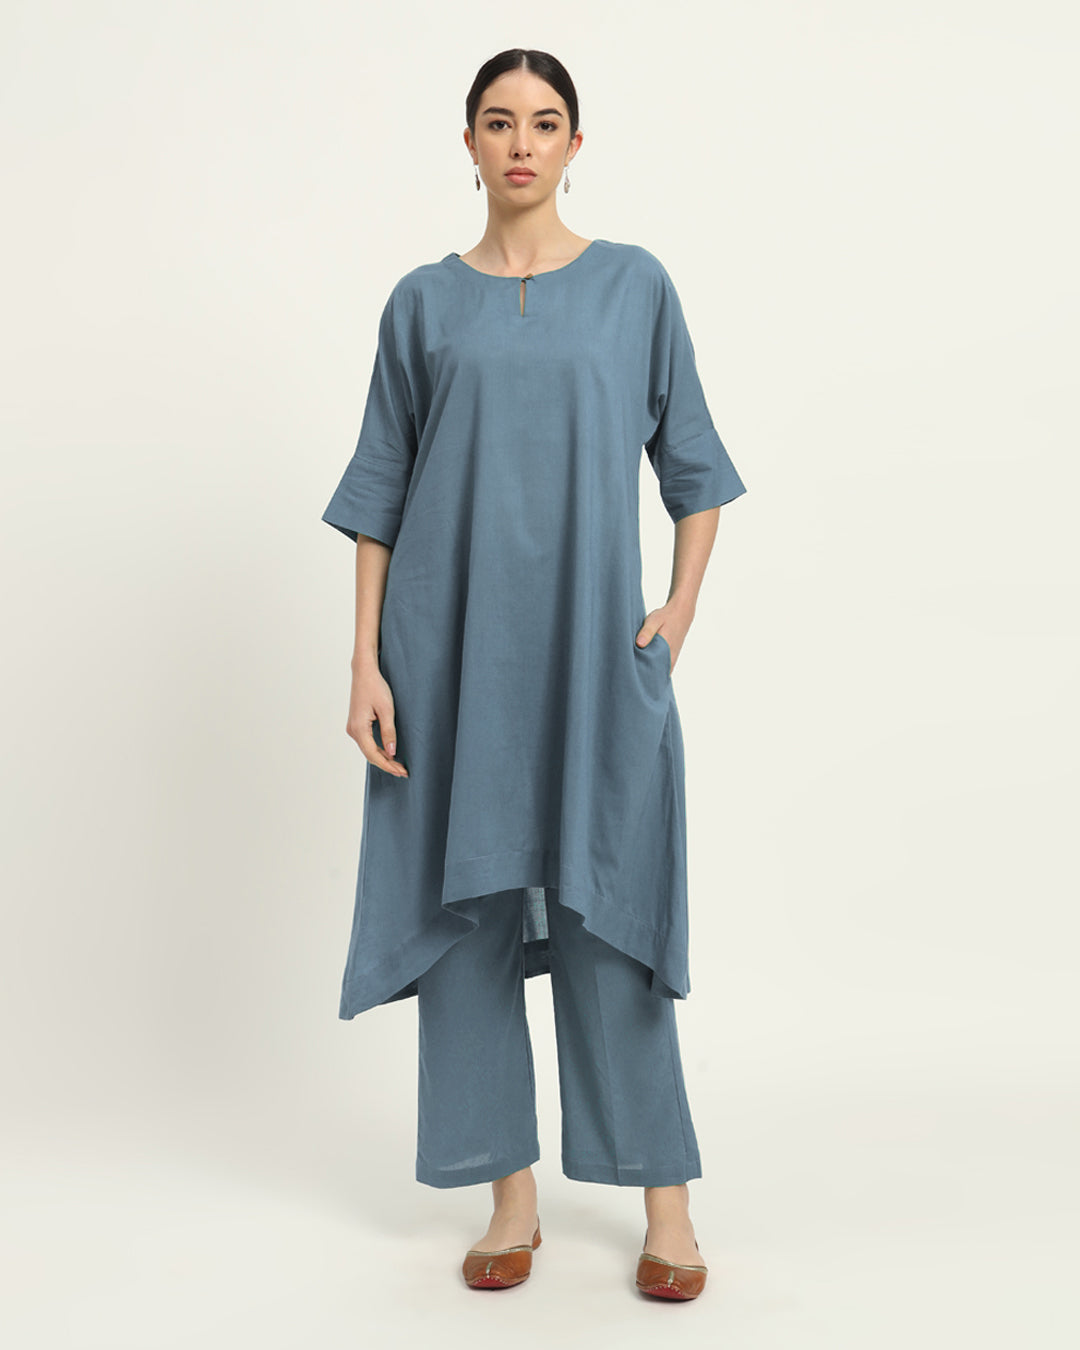 Combo: Blue Dawn & Lilac Flare & Flow Boat Neck Solid Kurta